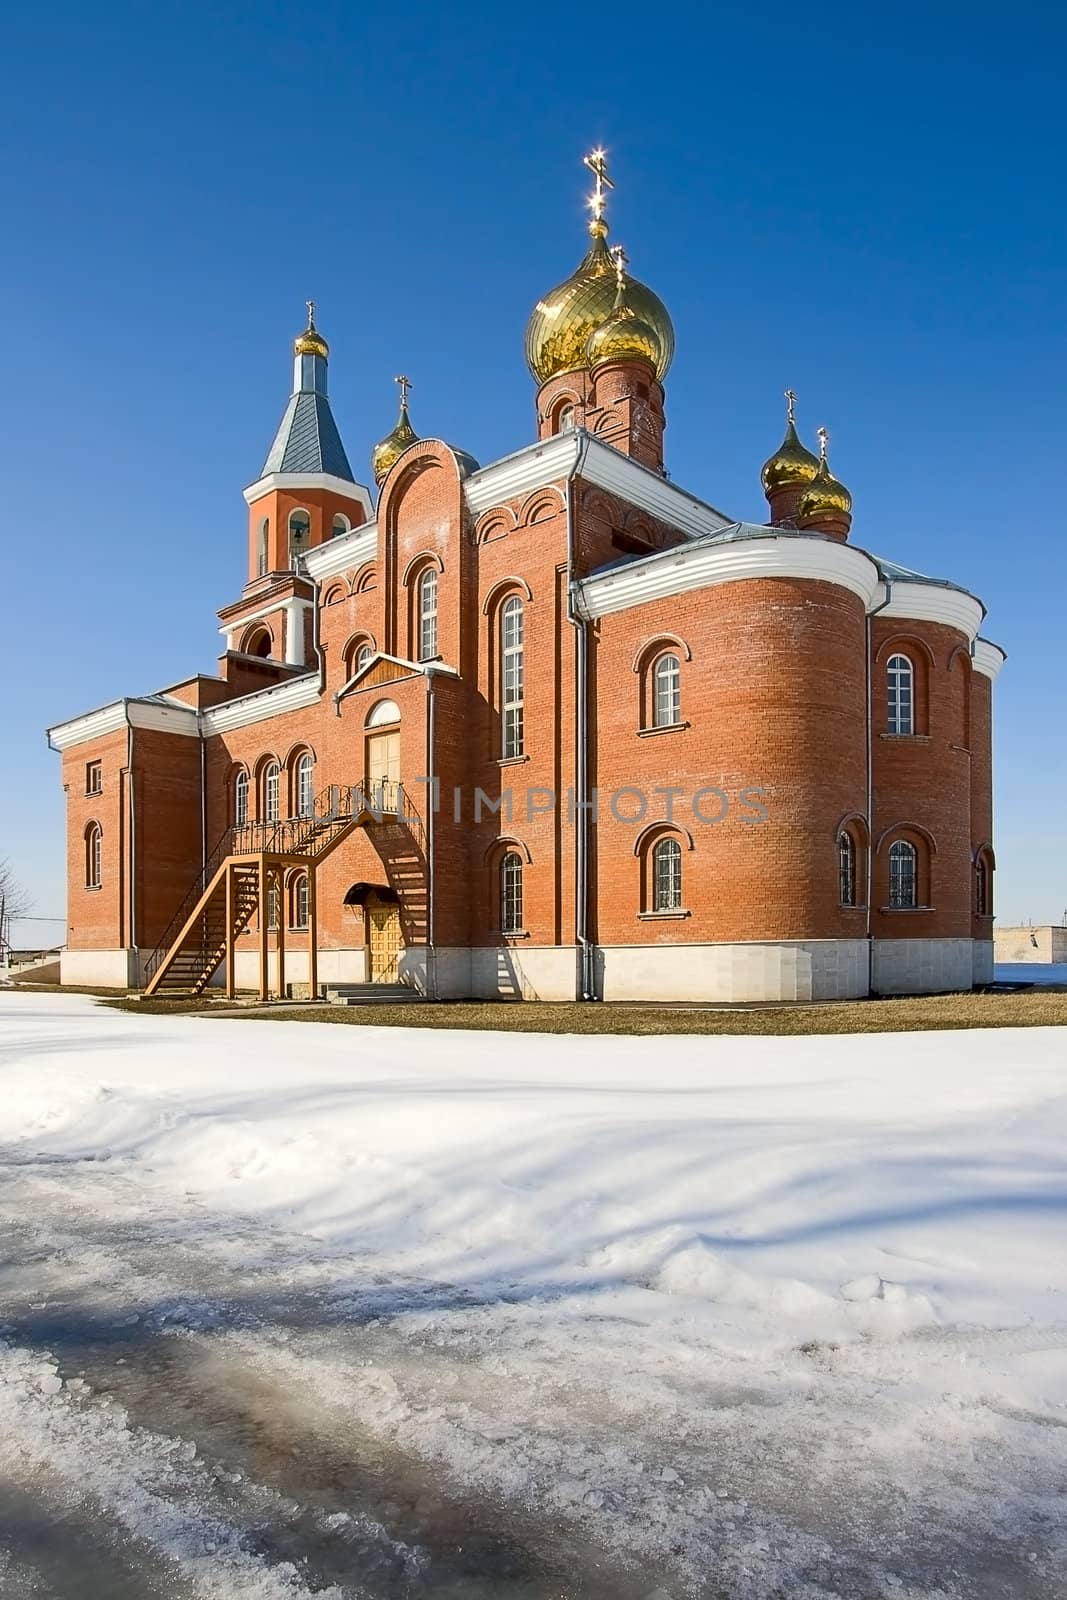 View of  beautiful church in  winter against  blue sky, Russia.